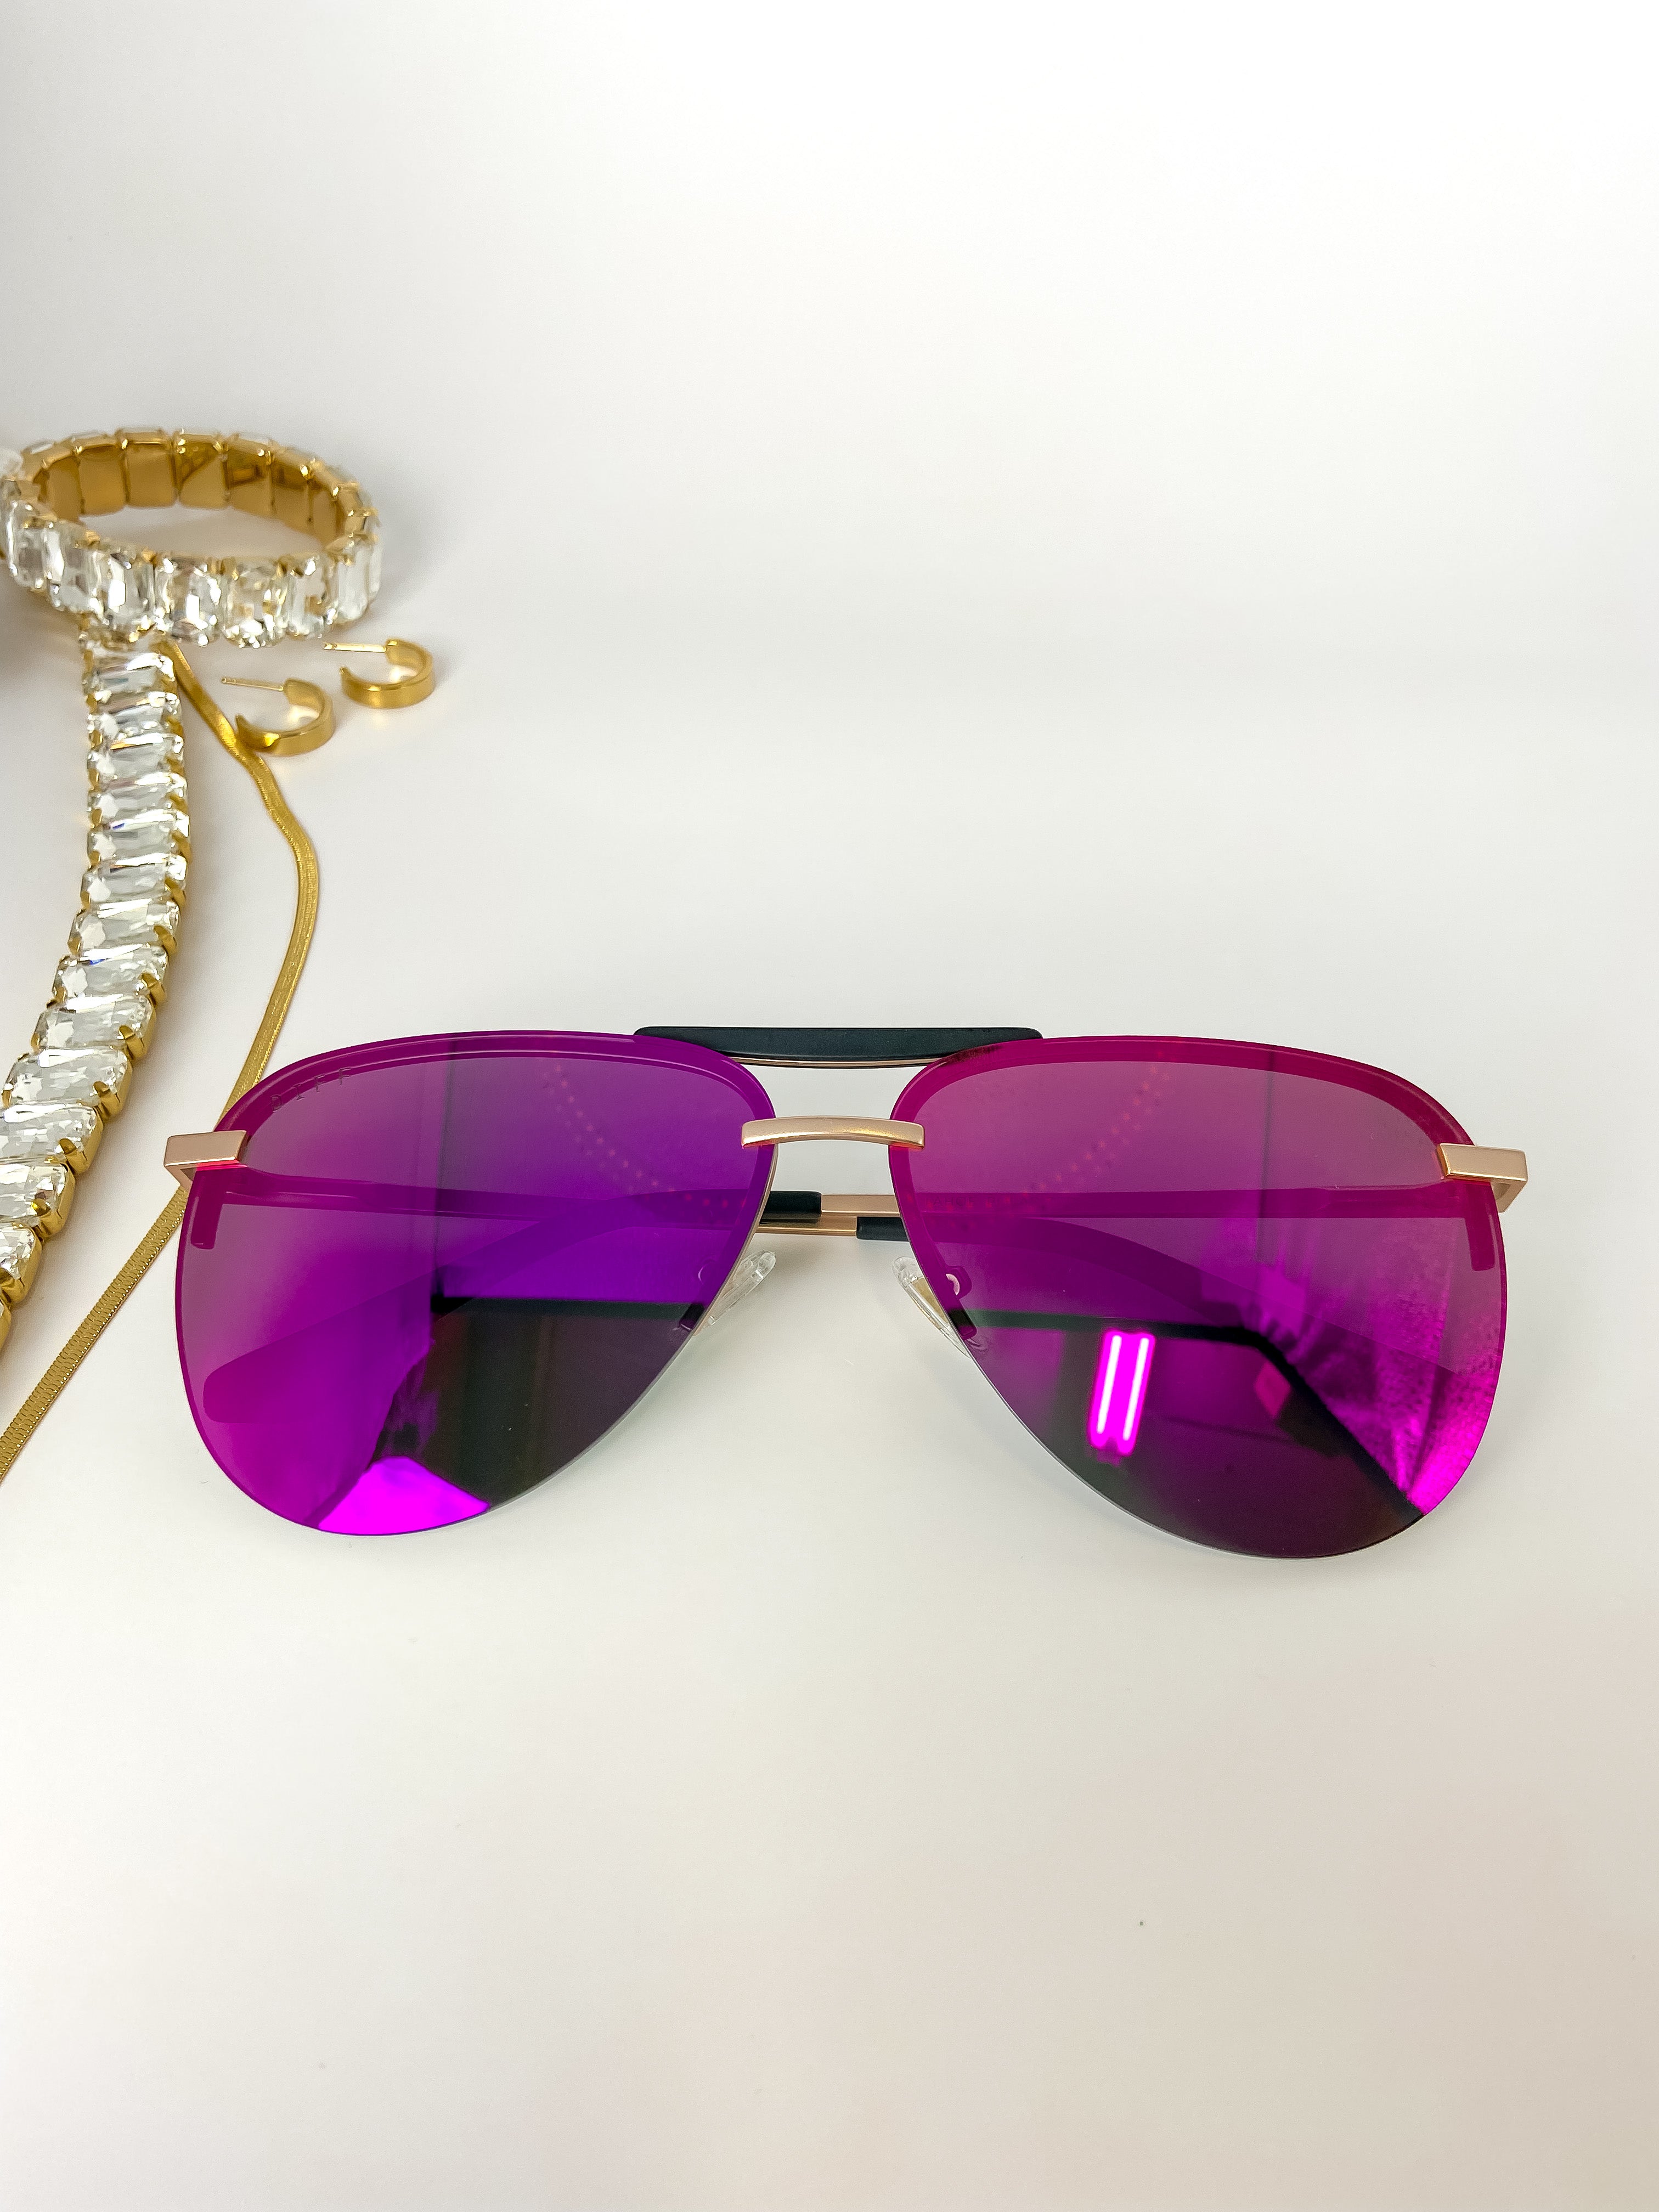 DIFF | Tahoe Sunset Mirror Lens Sunglasses in Gold Tone - Giddy Up Glamour Boutique